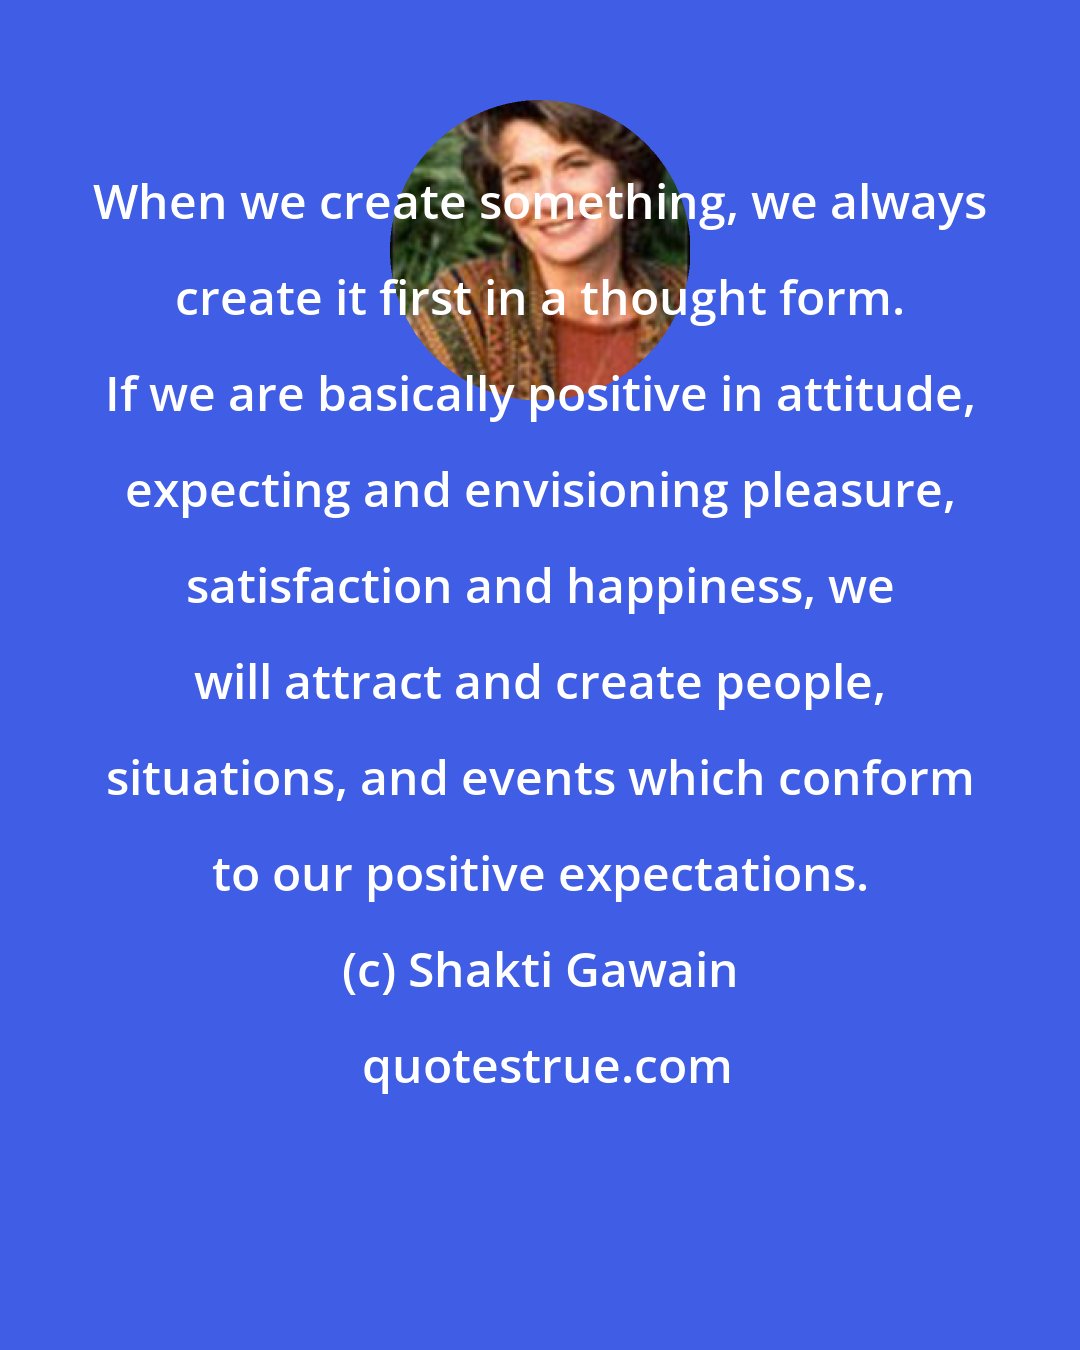 Shakti Gawain: When we create something, we always create it first in a thought form. If we are basically positive in attitude, expecting and envisioning pleasure, satisfaction and happiness, we will attract and create people, situations, and events which conform to our positive expectations.